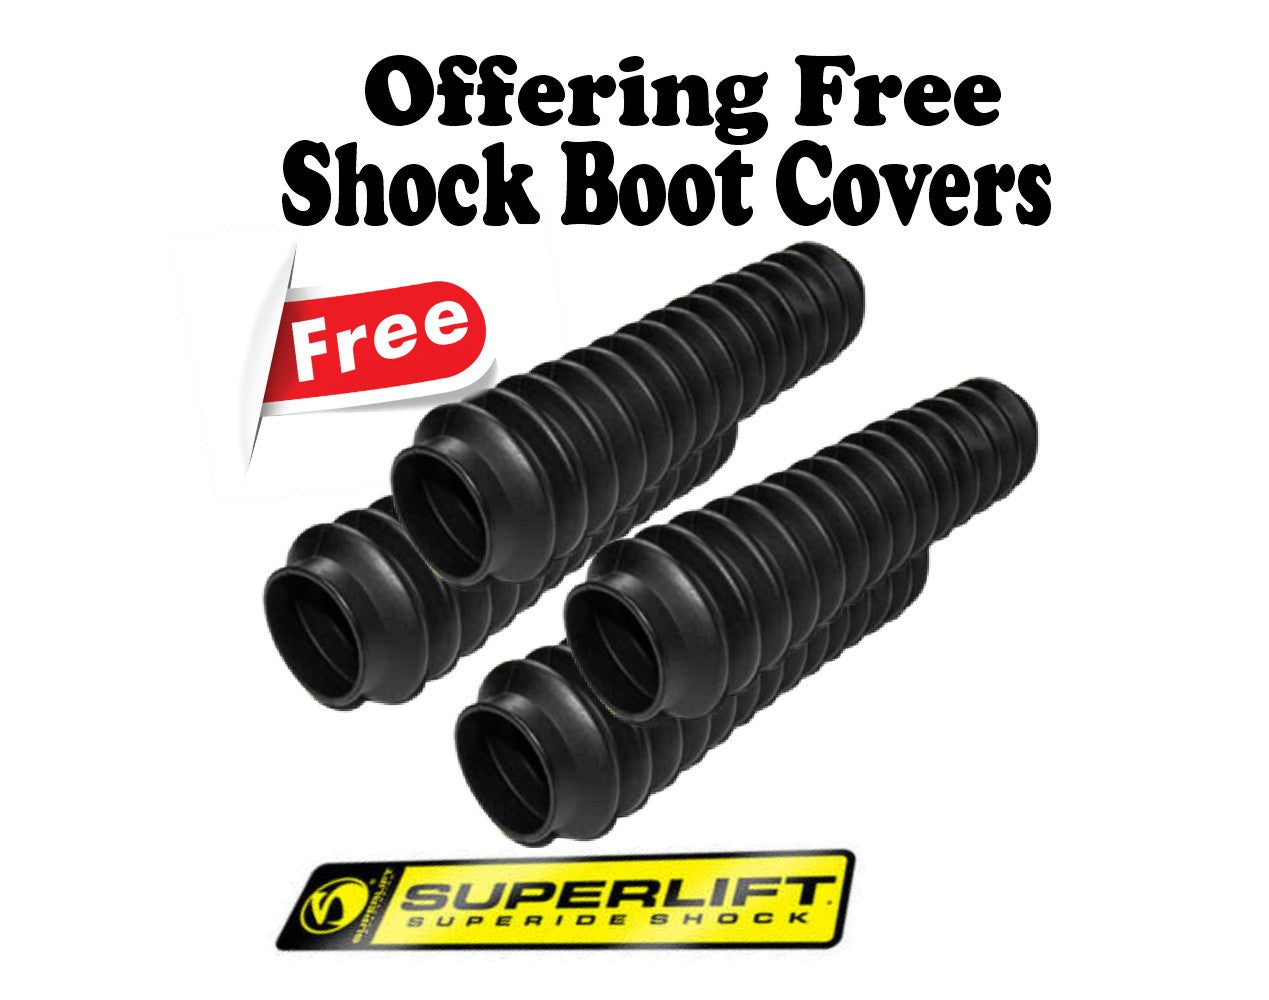 Superlift 1986-1992 Jeep Comanche 1993-1998 Jeep Grand Cherokee 4WD 2-5" Rear Superlift Shadow Shock Absorber 87112/86040X4